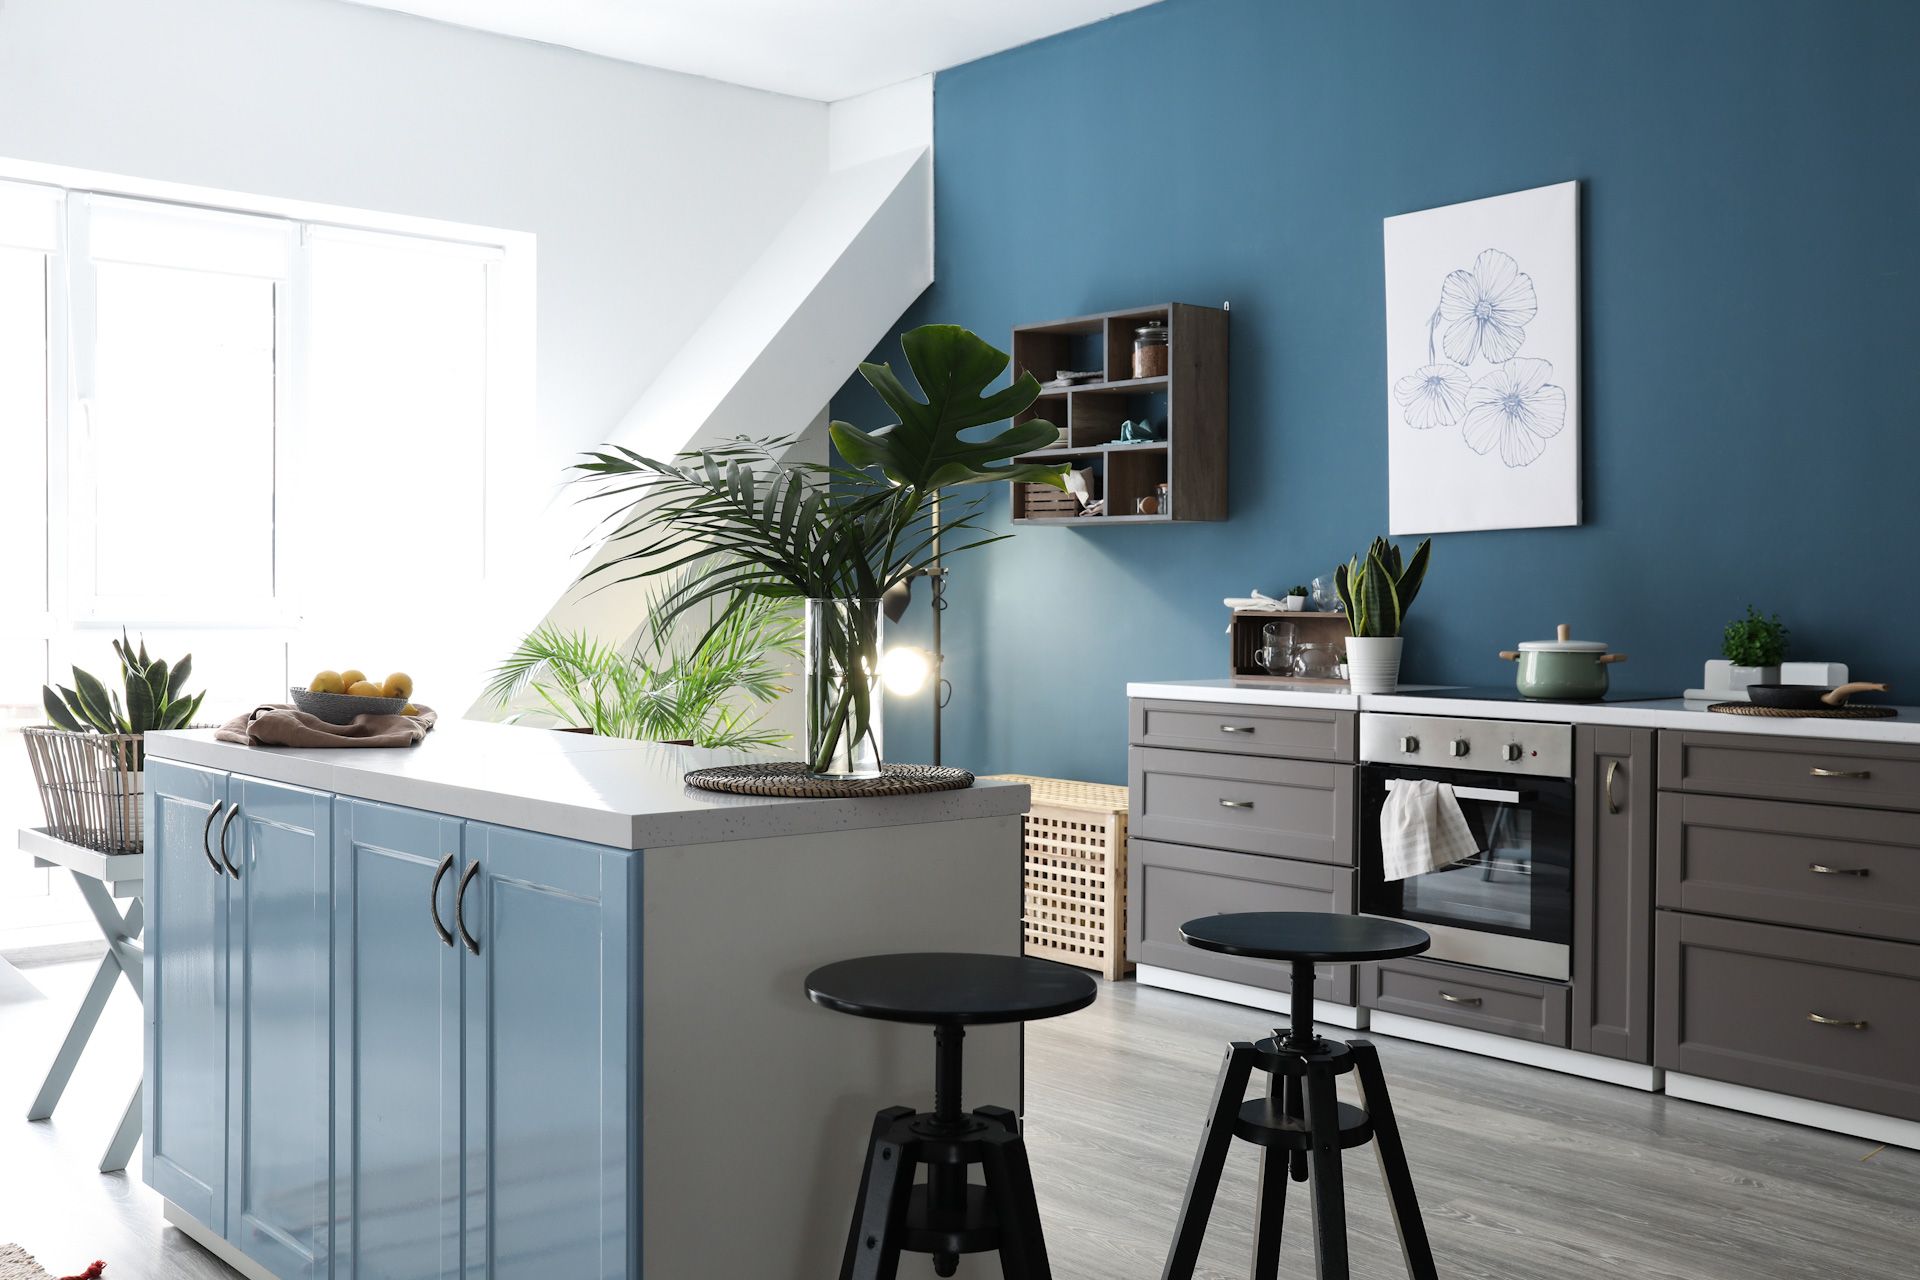 A kitchen with blue walls and gray cabinets and stools